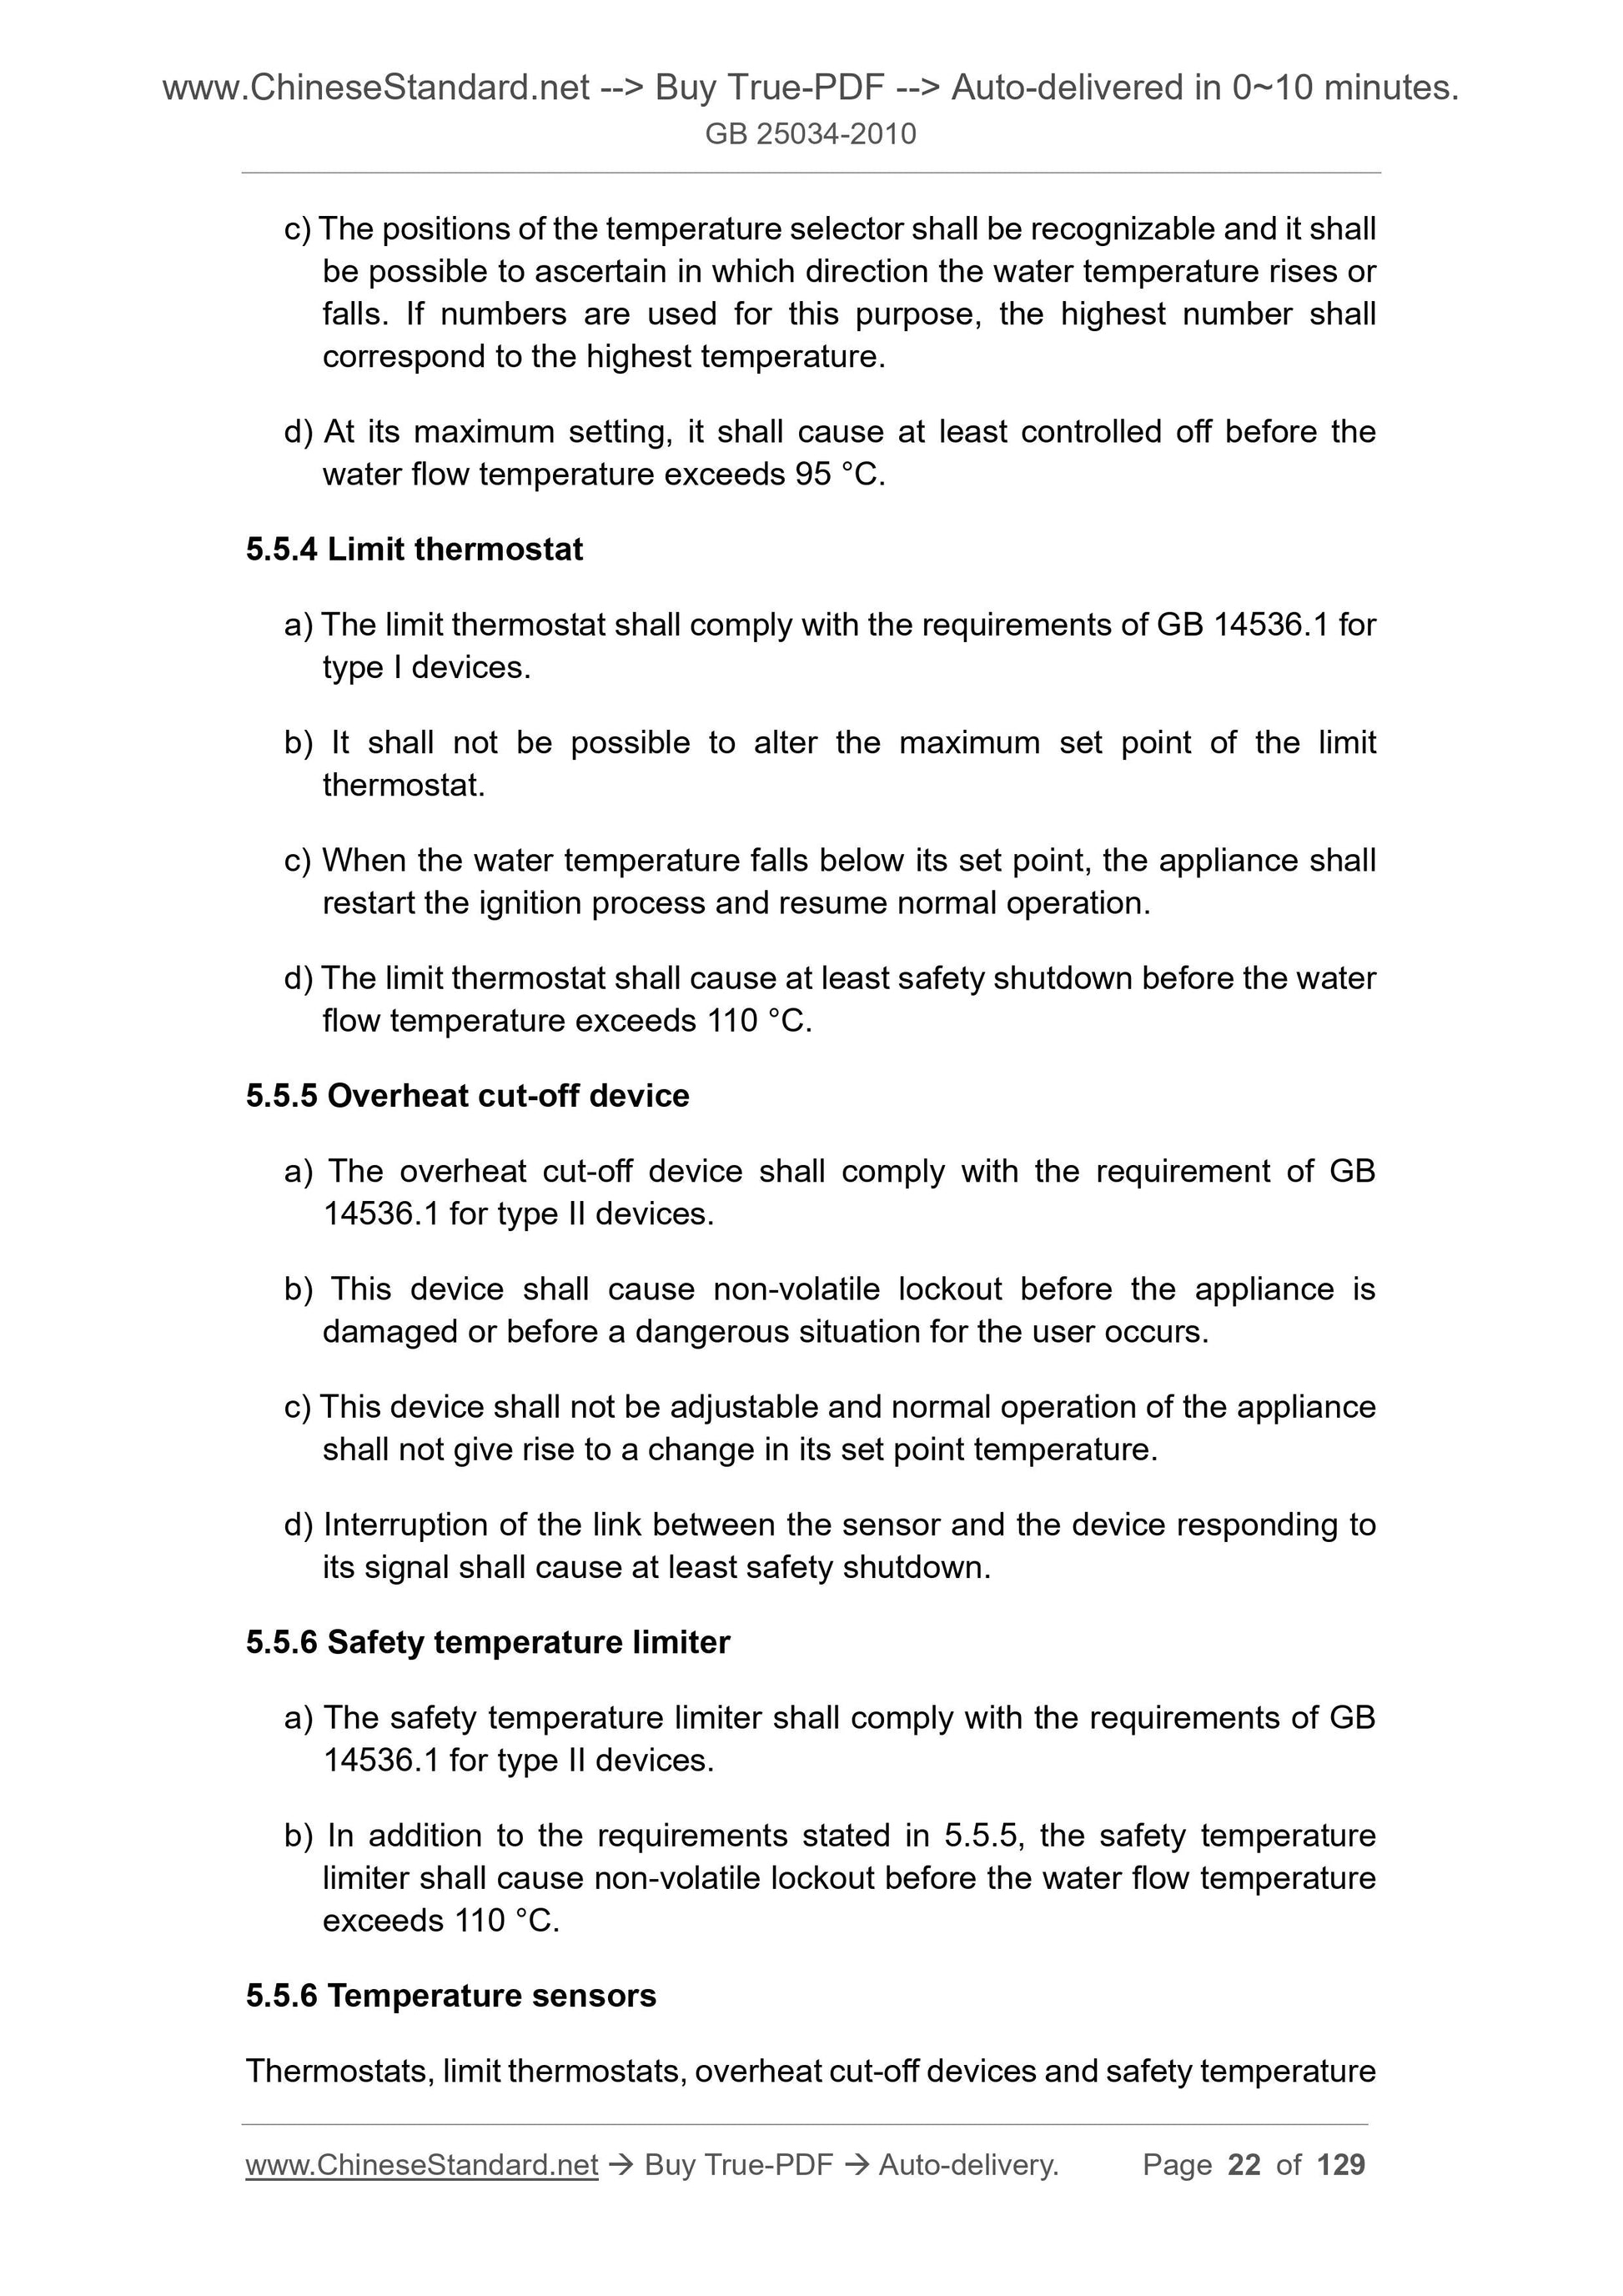 GB 25034-2010 Page 10